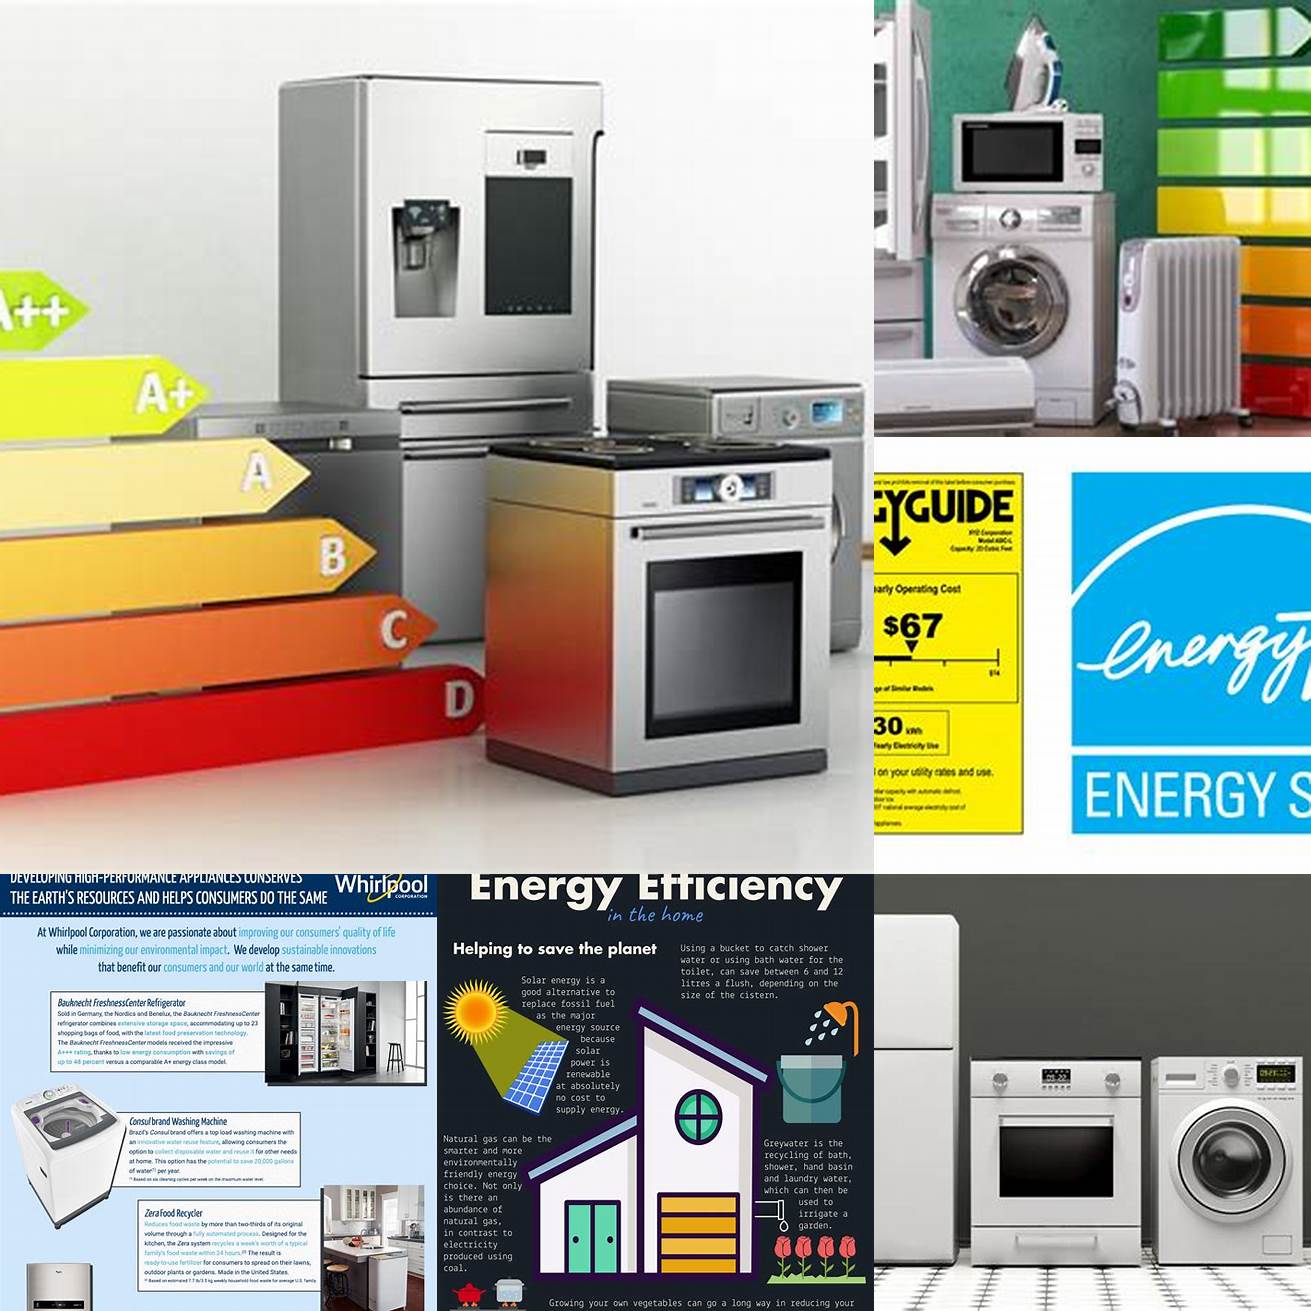 1 Choose energy-efficient appliances for cost savings and sustainability Look for appliances with the ENERGY STAR label which indicates that they meet energy efficiency guidelines